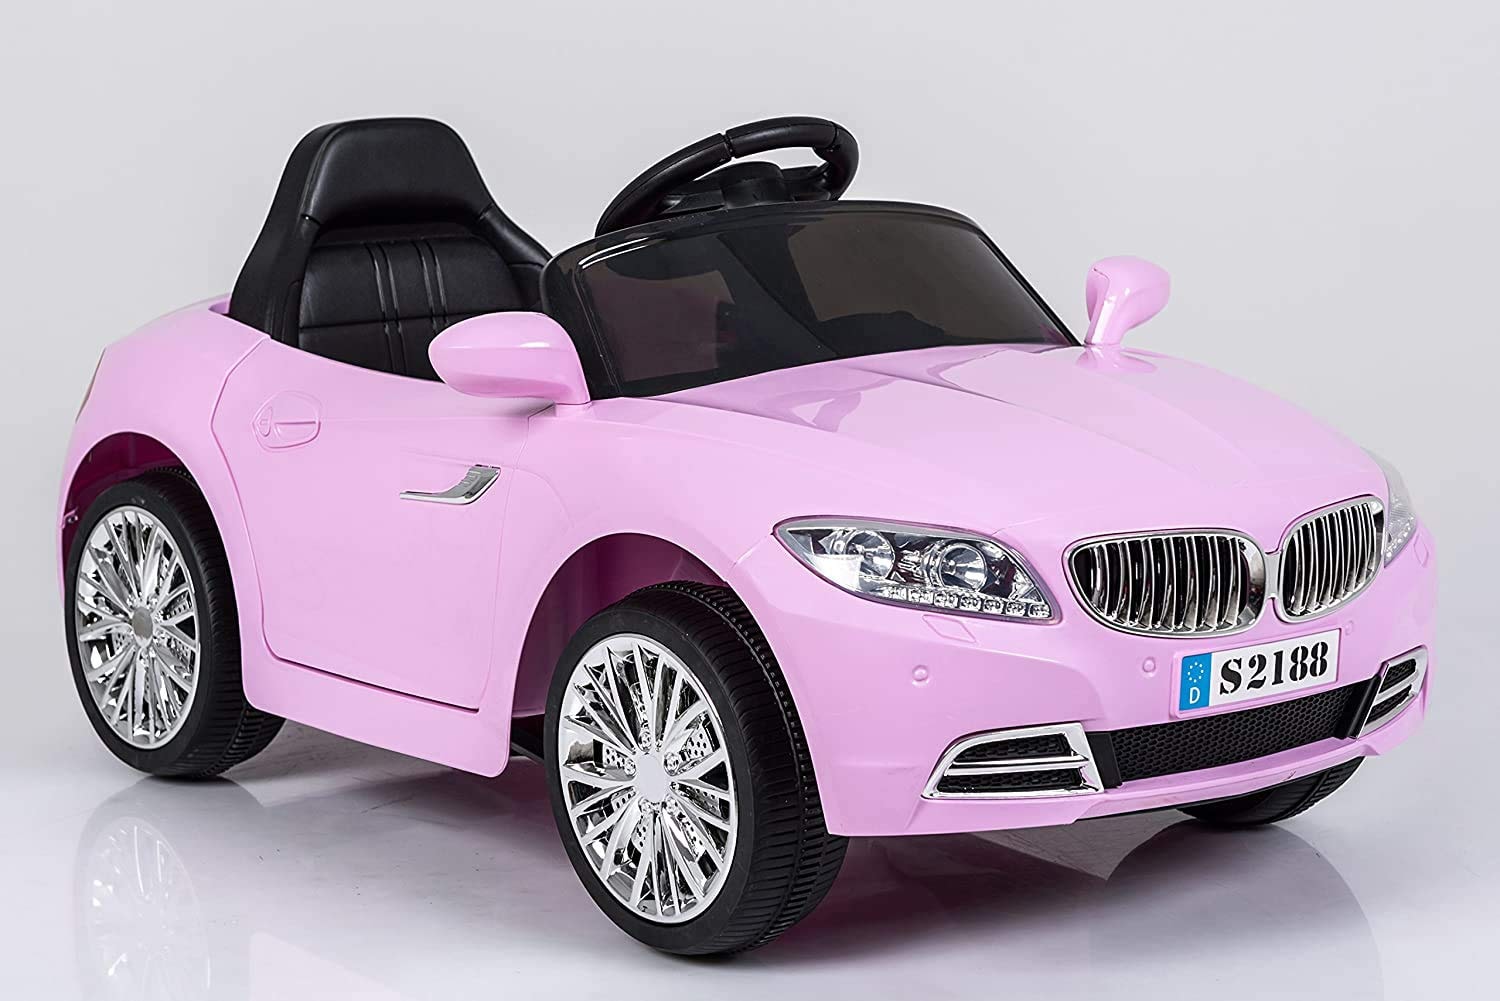 Dorsa Coupe Bmw Style Ride On Car For Kids